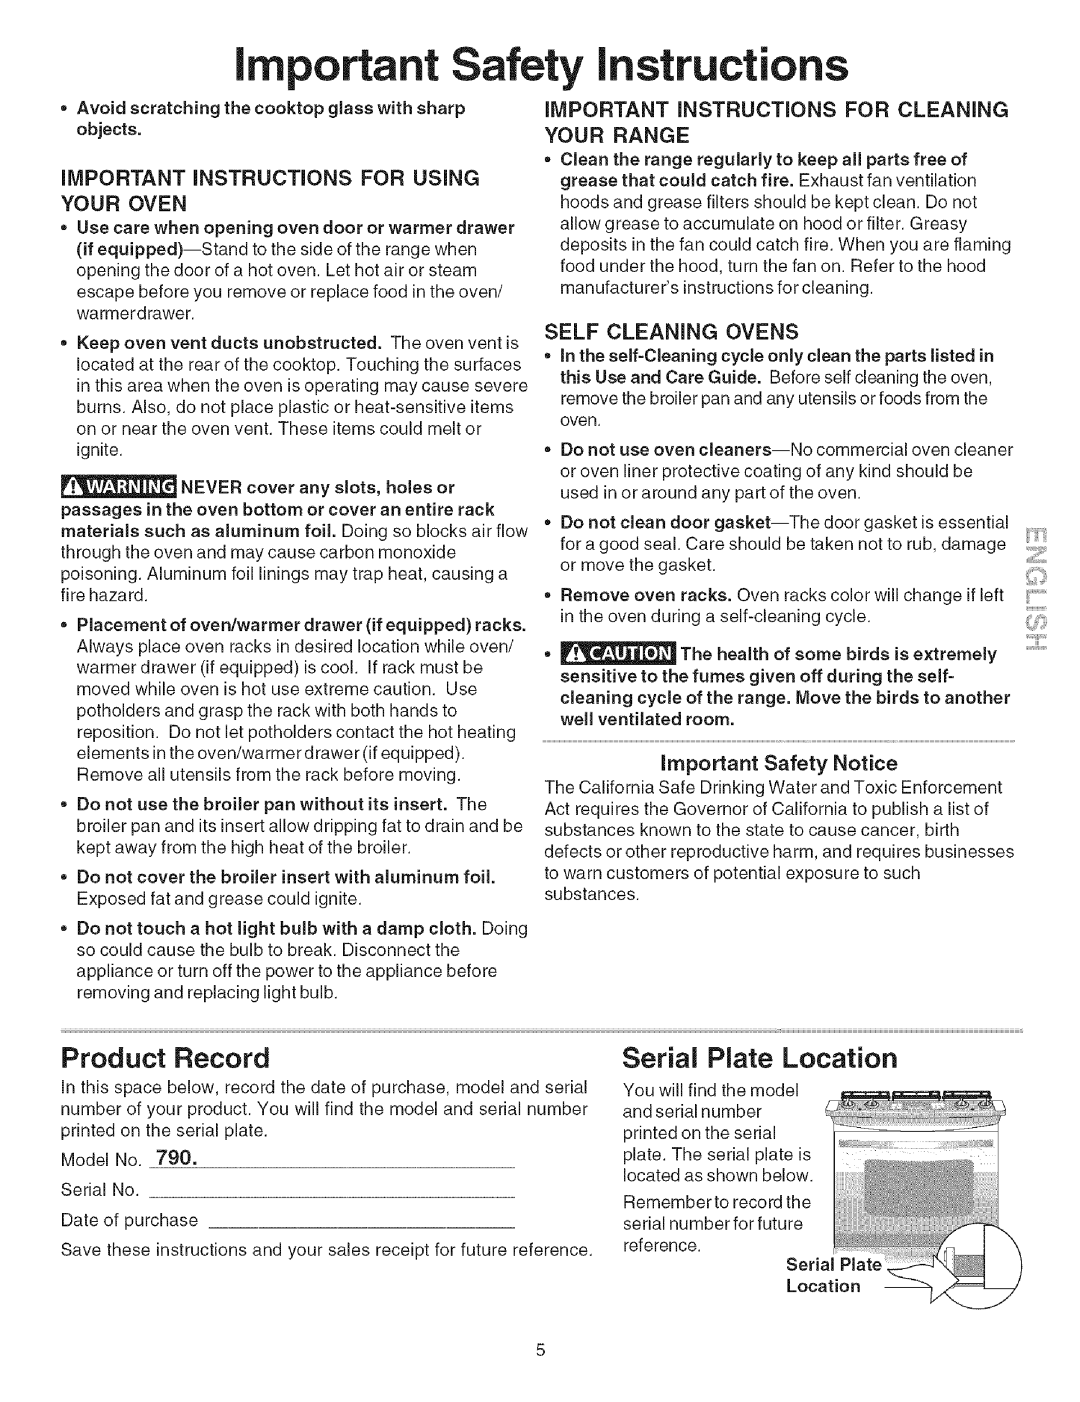 Kenmore 790.3671 Product Record, Serial Plate Location, important Safety Instructions, Important Instructions For Using 